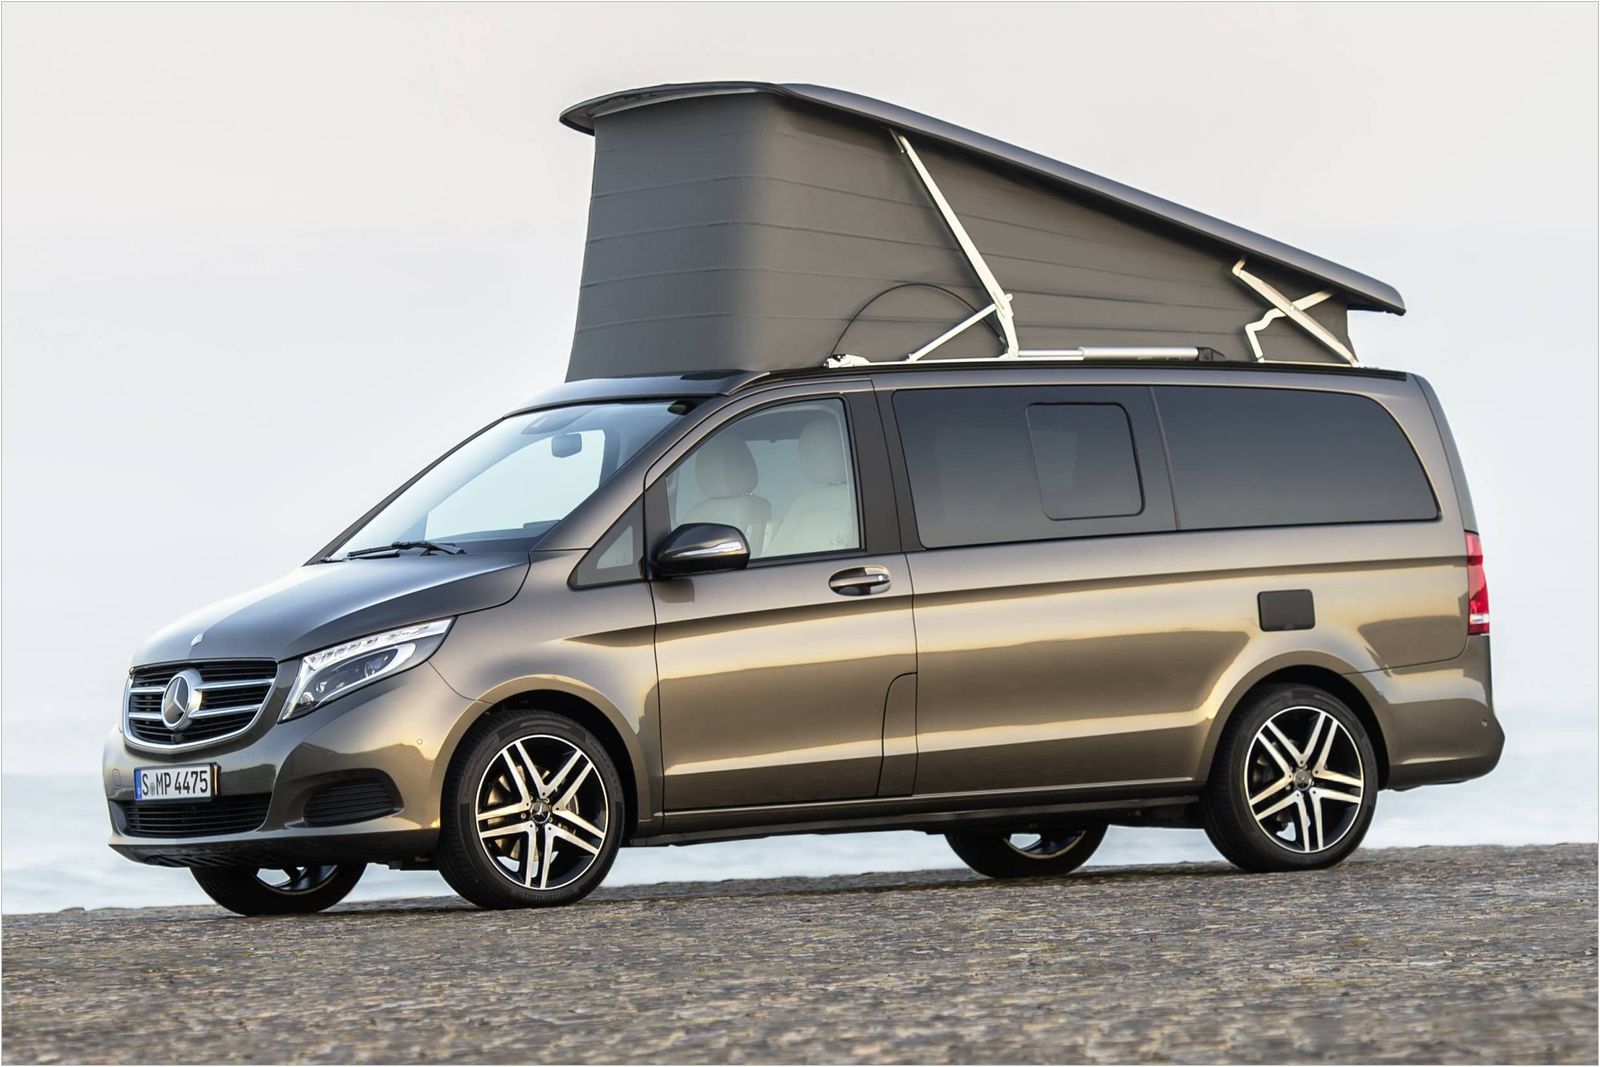 Mercedes-Benz Marco Polo, 1600x1067px, img-1